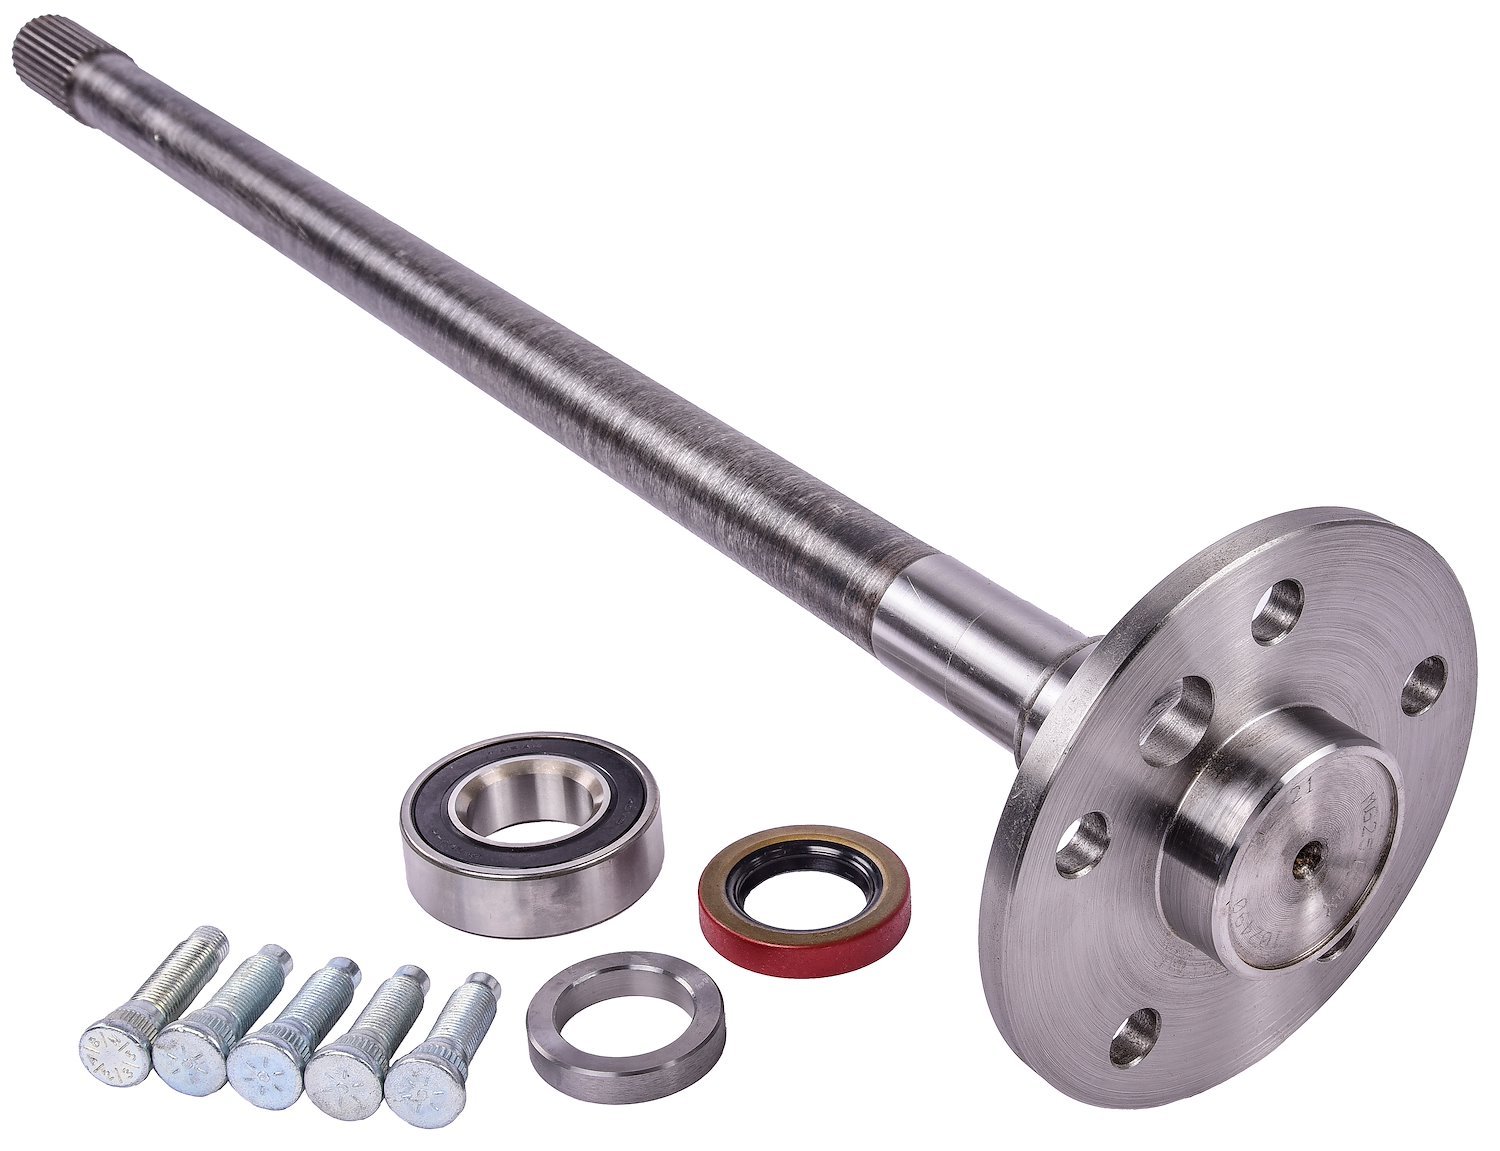 Rear Axle Shaft for 1967-1970 Ford Mustang & Cougar, Left/Driver Side [Ford 9 in. 31 Spline]